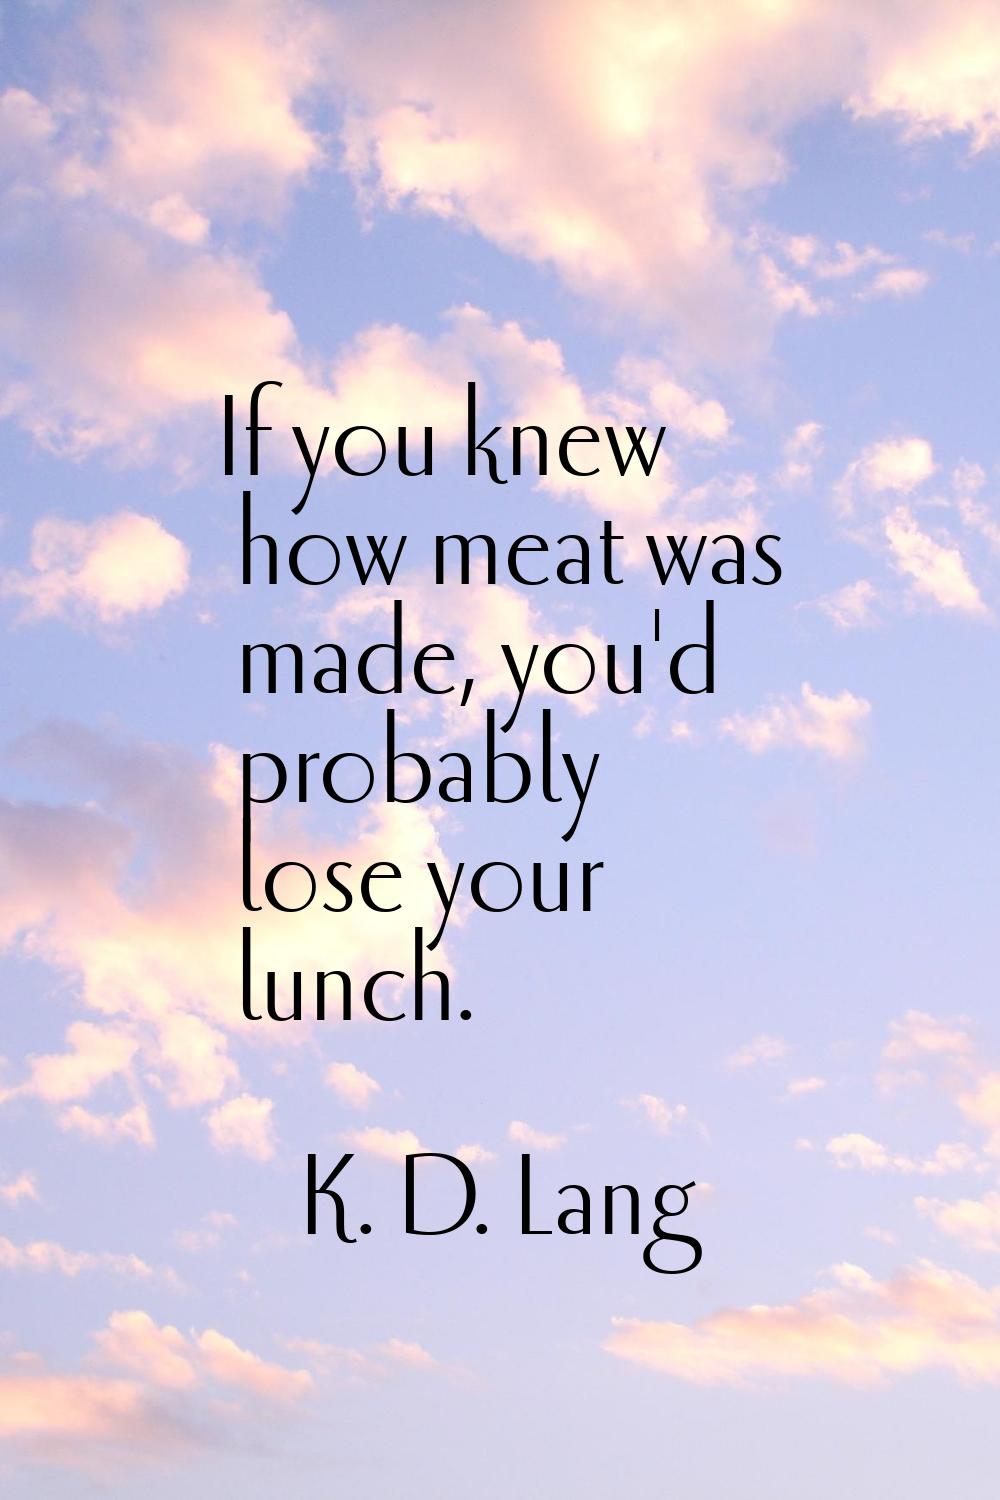 If you knew how meat was made, you'd probably lose your lunch.